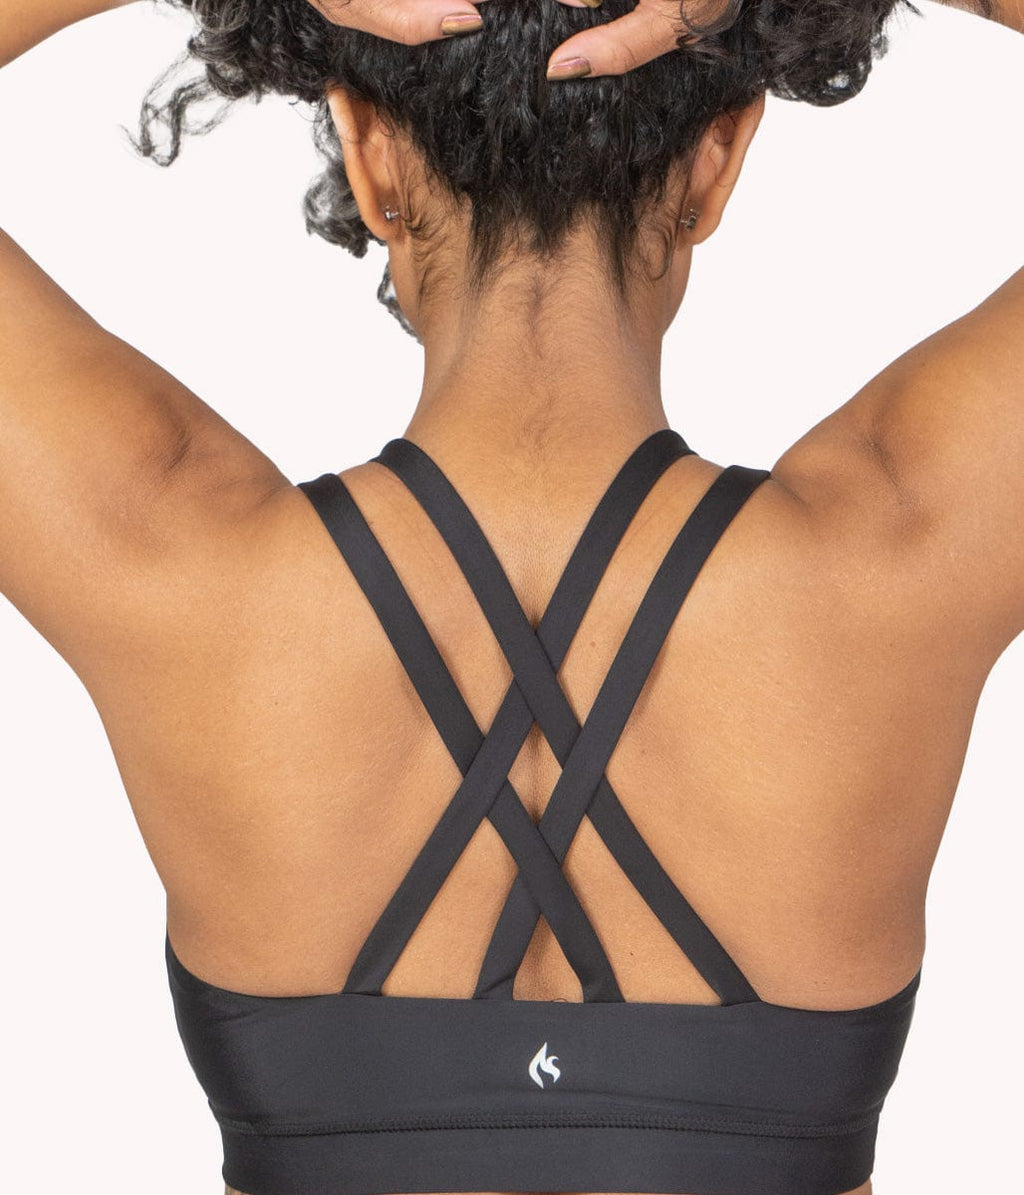 A model showing the Criss Cross Strappy Back design of our sports bra in obsidian. 